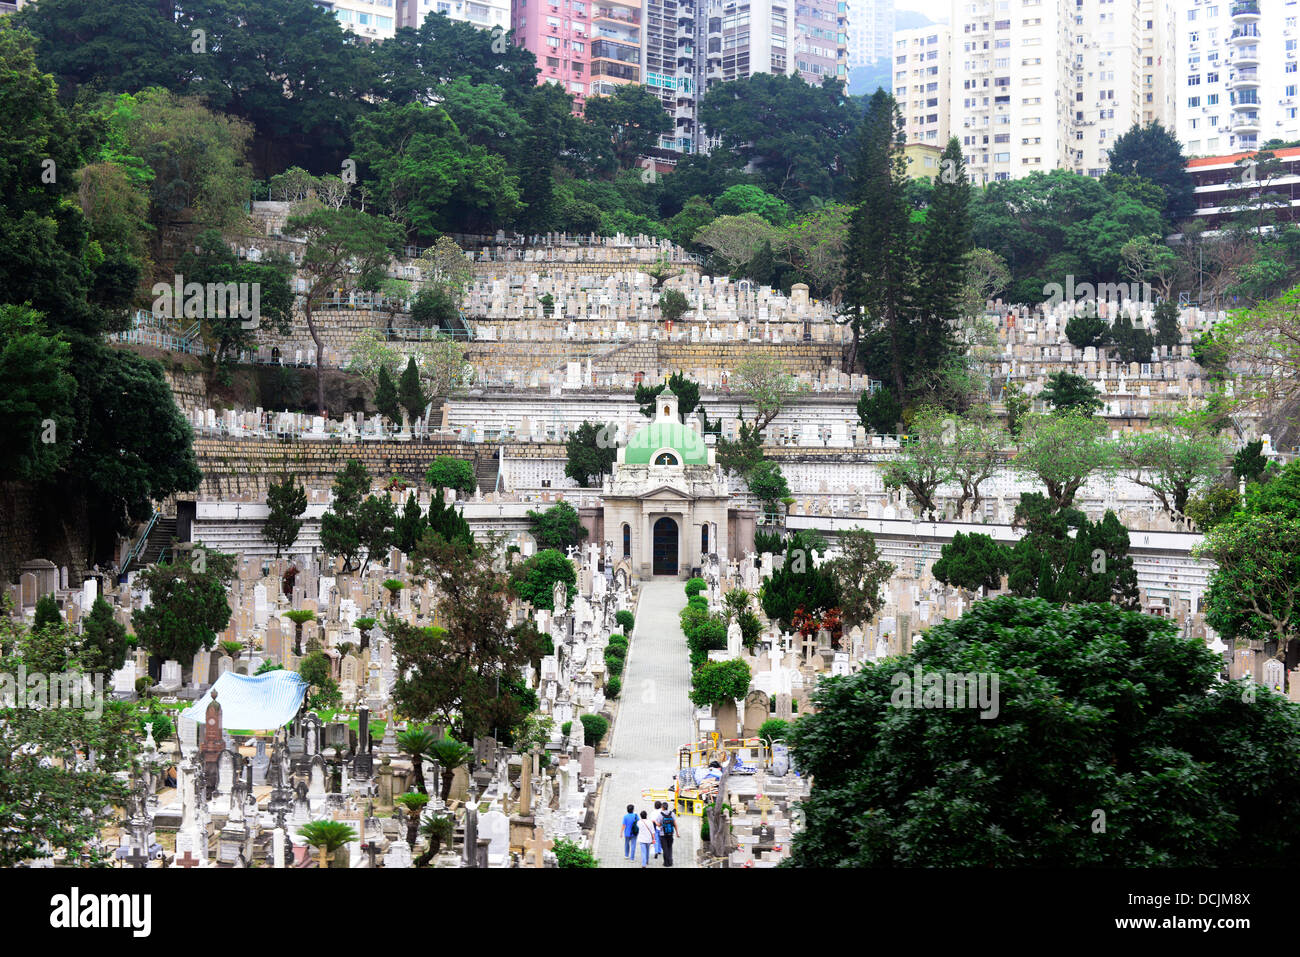 Catholic cemetery in Happy Valley, Hong Kong. Stock Photo